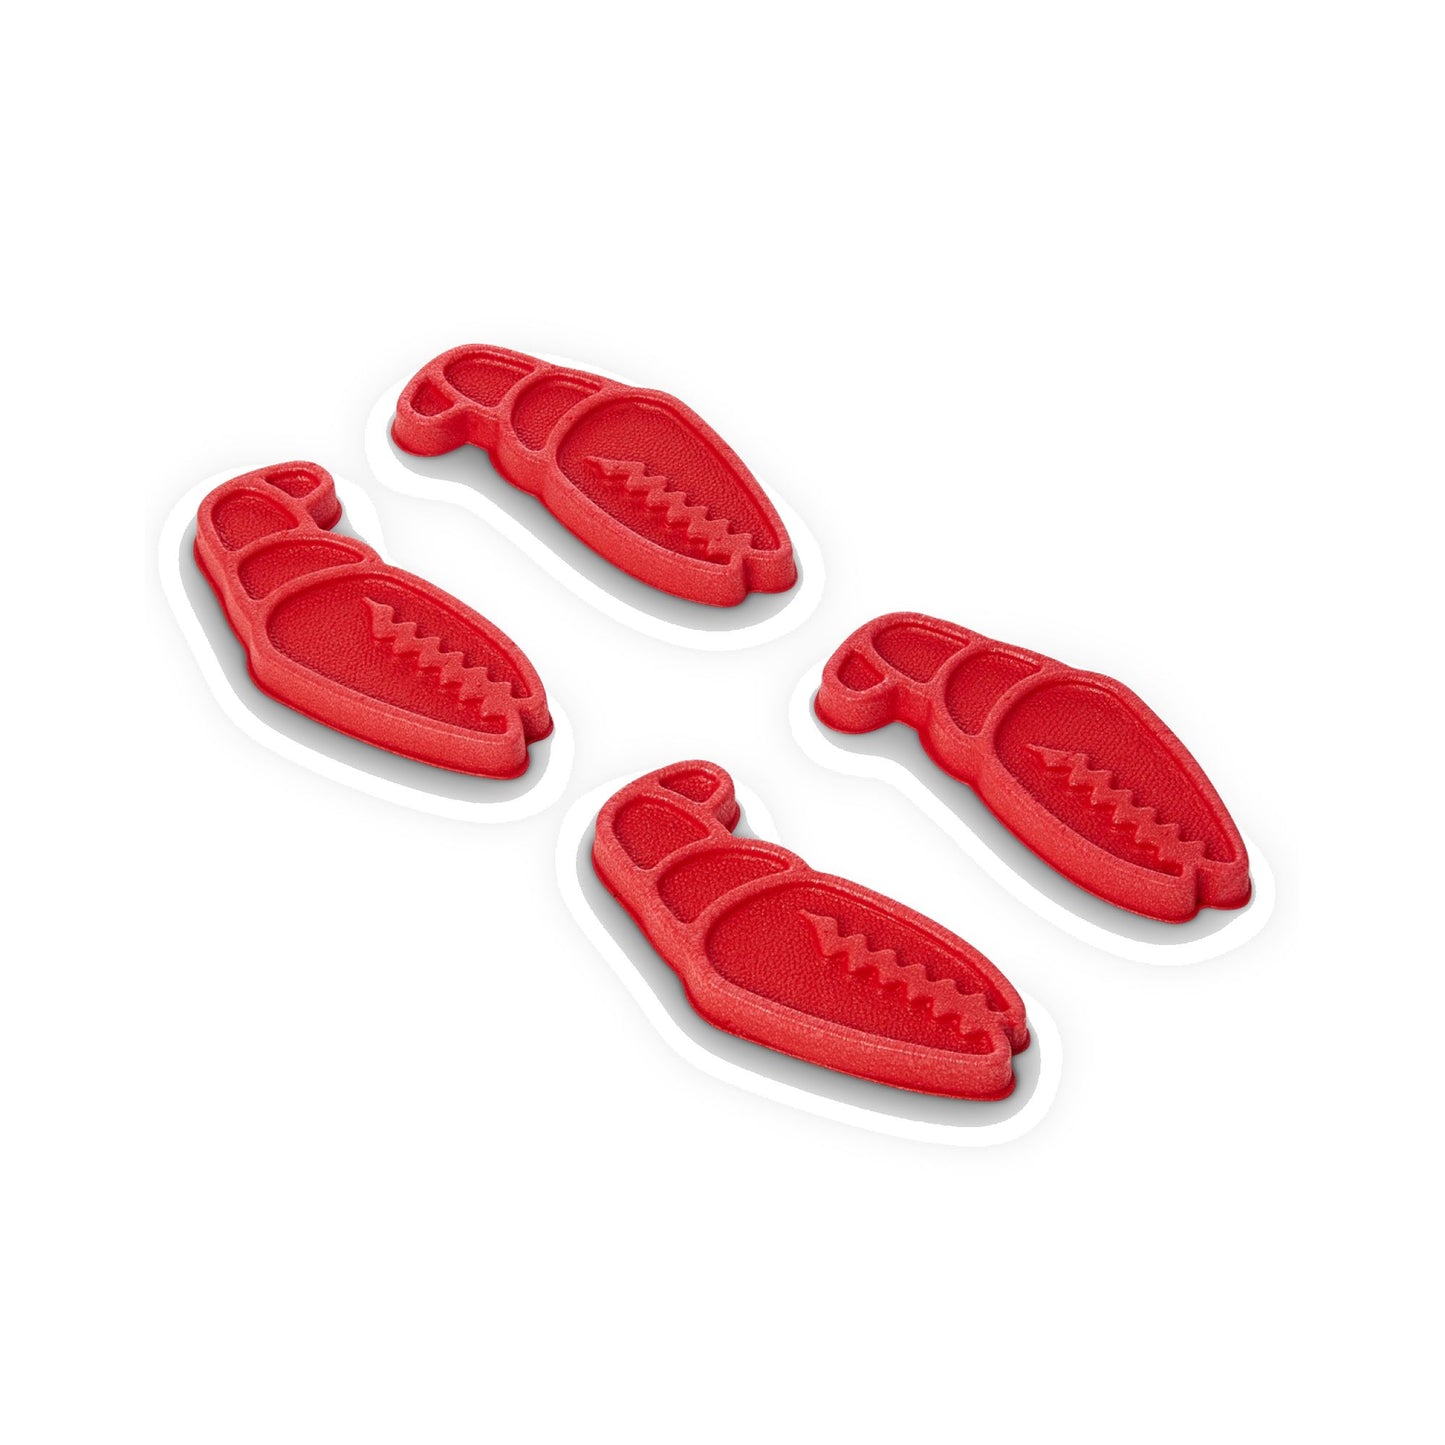 Crab Grab Mini Claws Traction Pad Red OS Stomp Pads